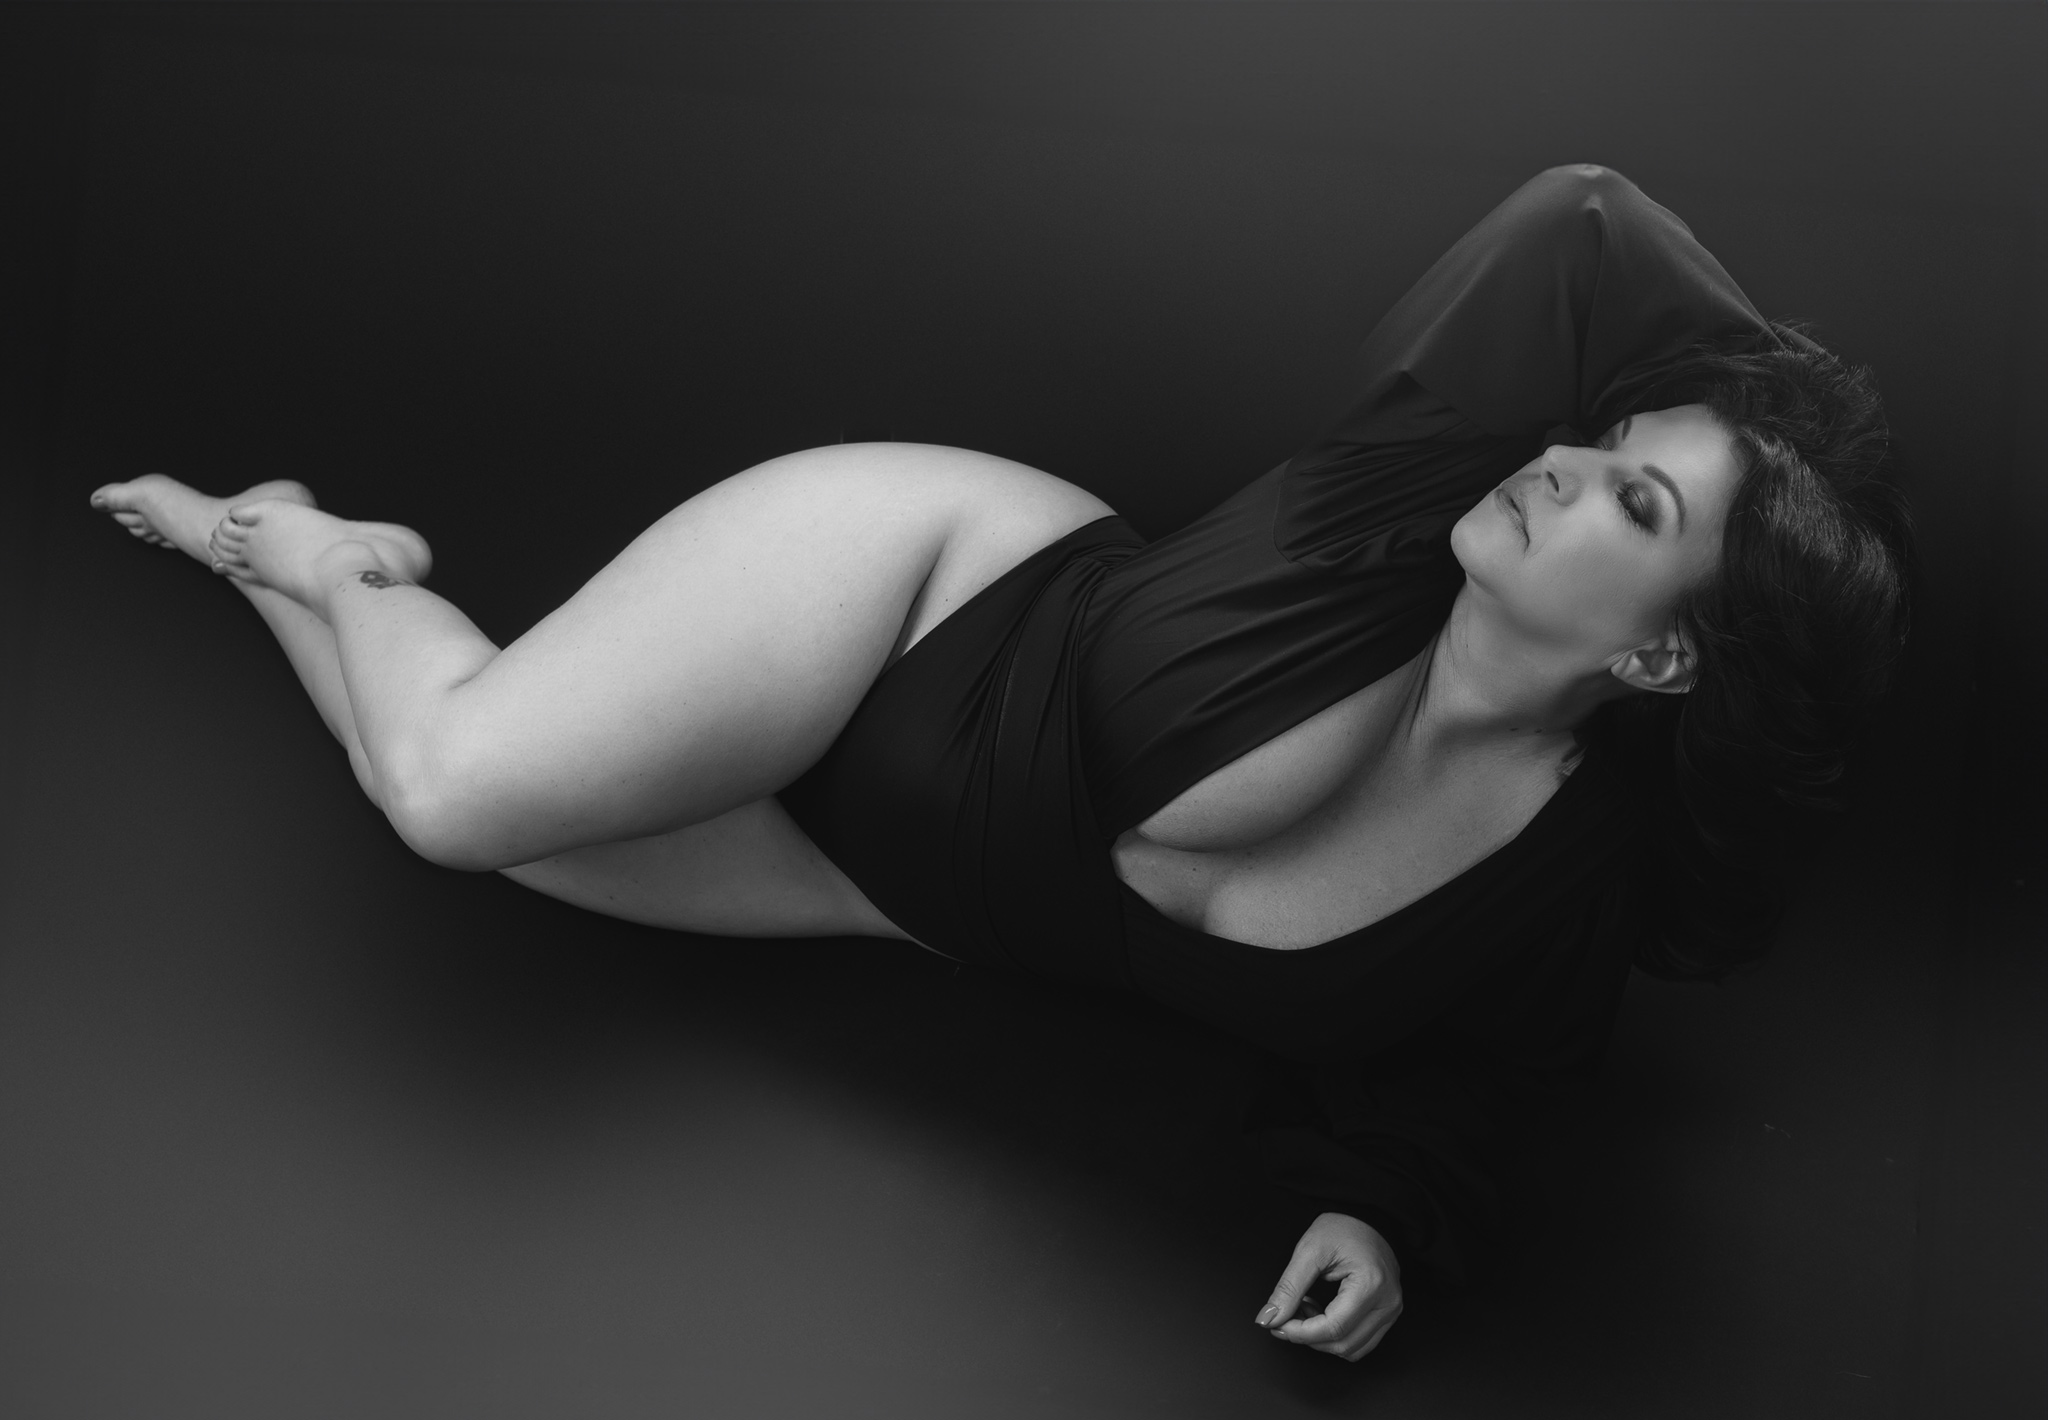 women celebrates her 50 th birthday with a boudoir photography session in black and white